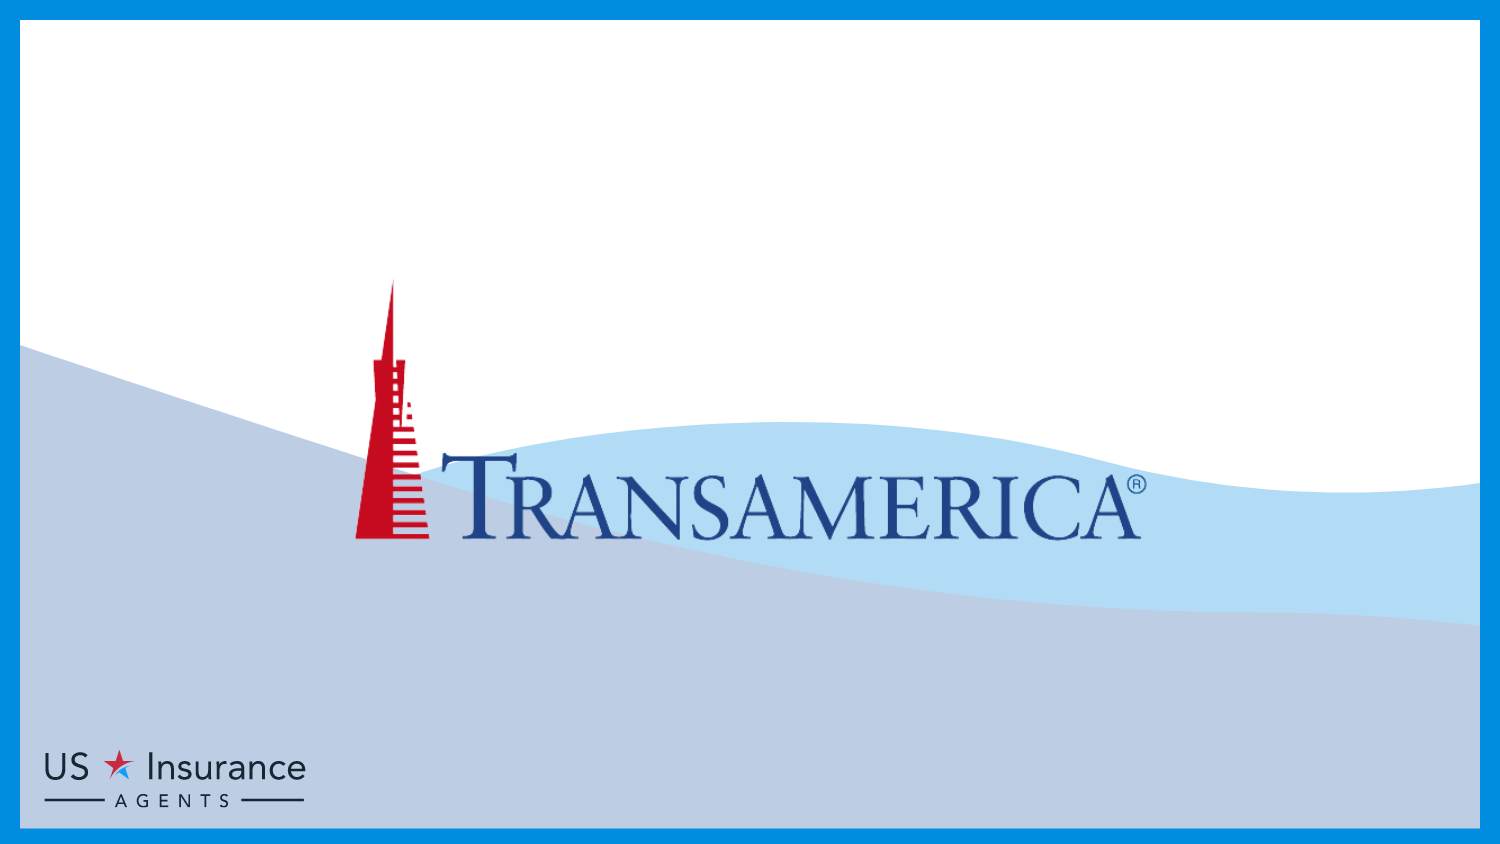 Transamerica: Best Life Insurance for People With Cystic Fibrosis